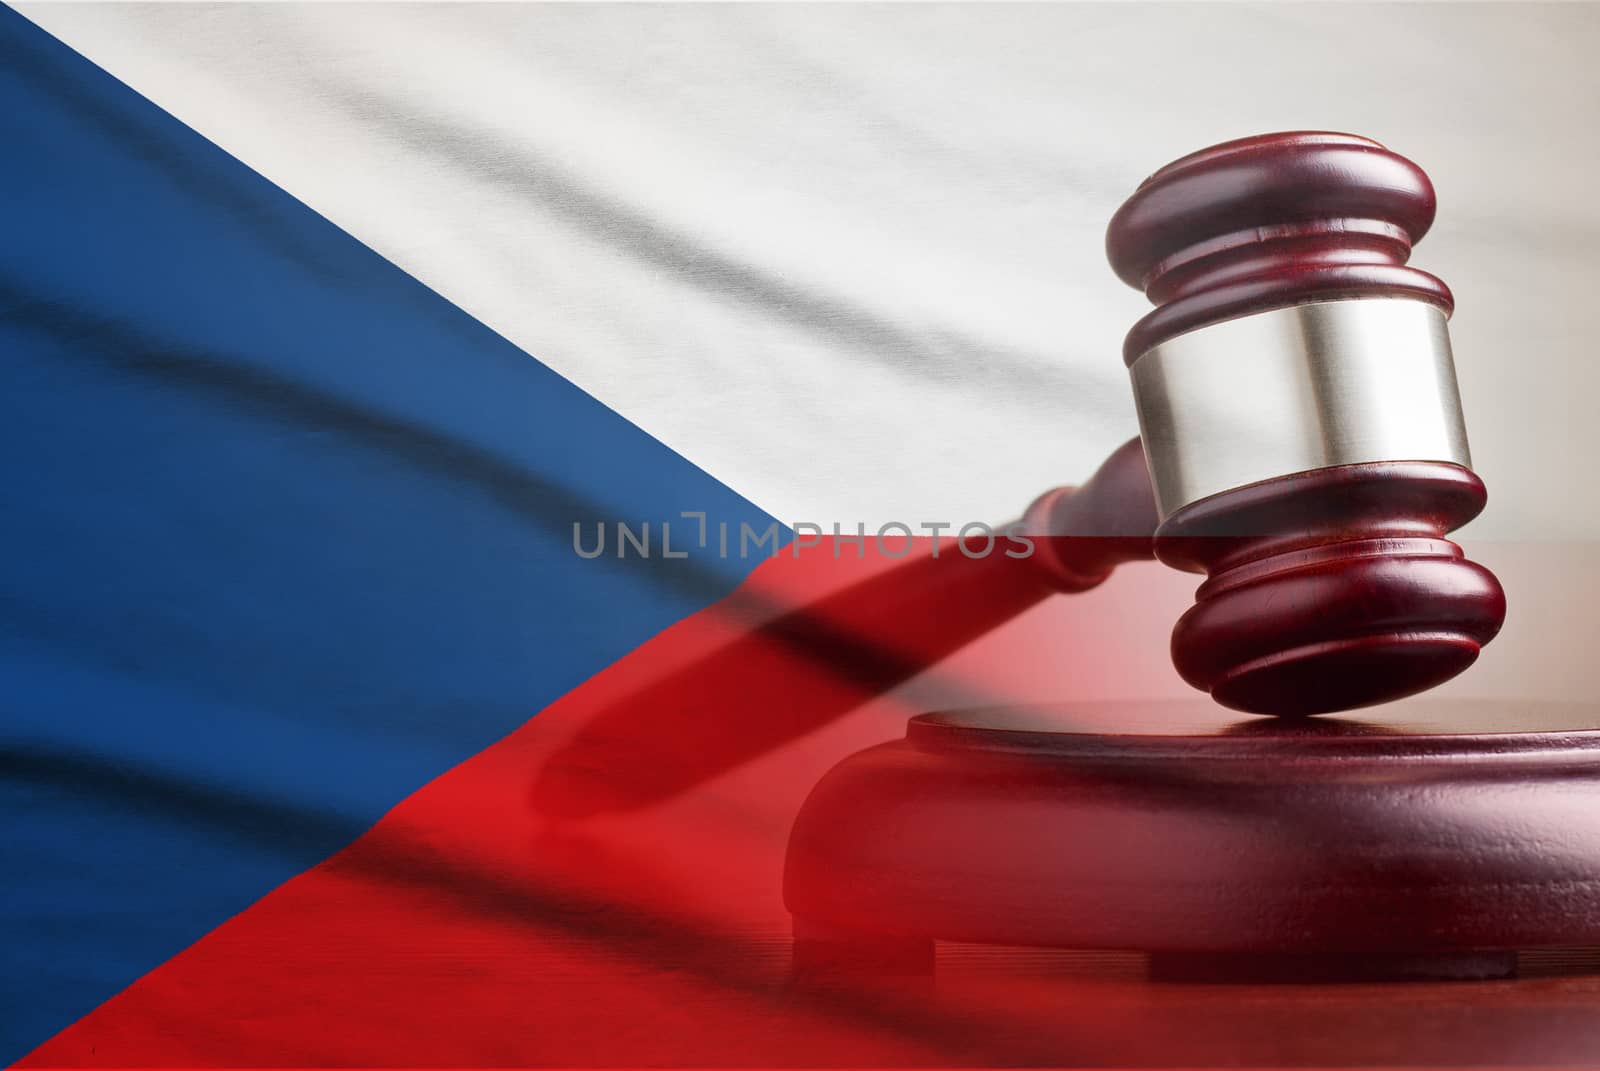 Legal gavel on its plinth over a flag of the Czech Republic in a conceptual composite image